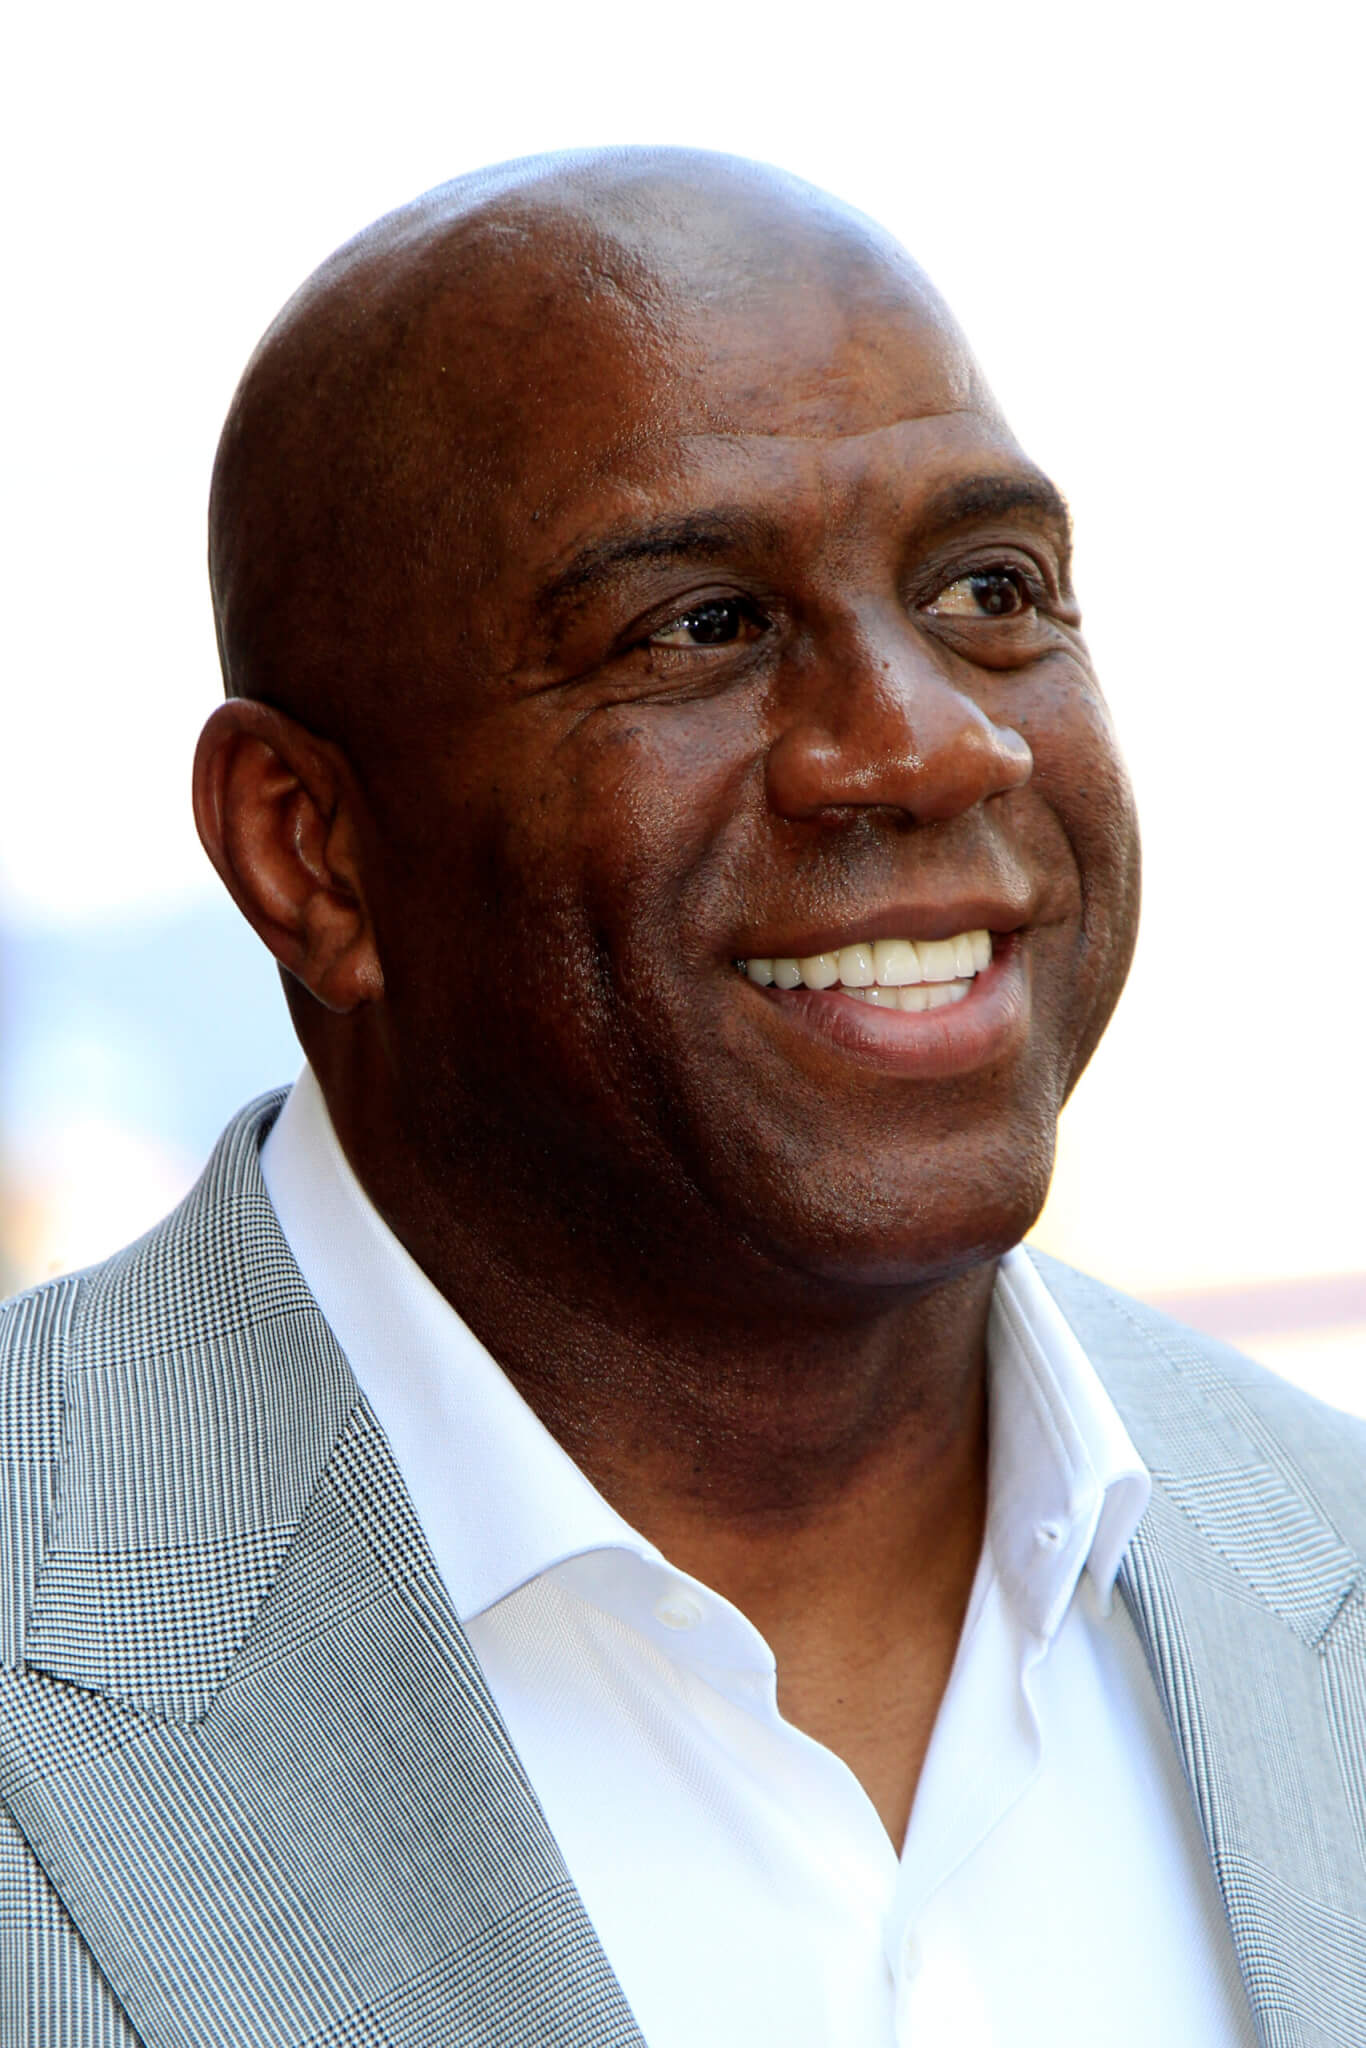 Magic Johnson on the Hollywood Walk of Fame in 2018